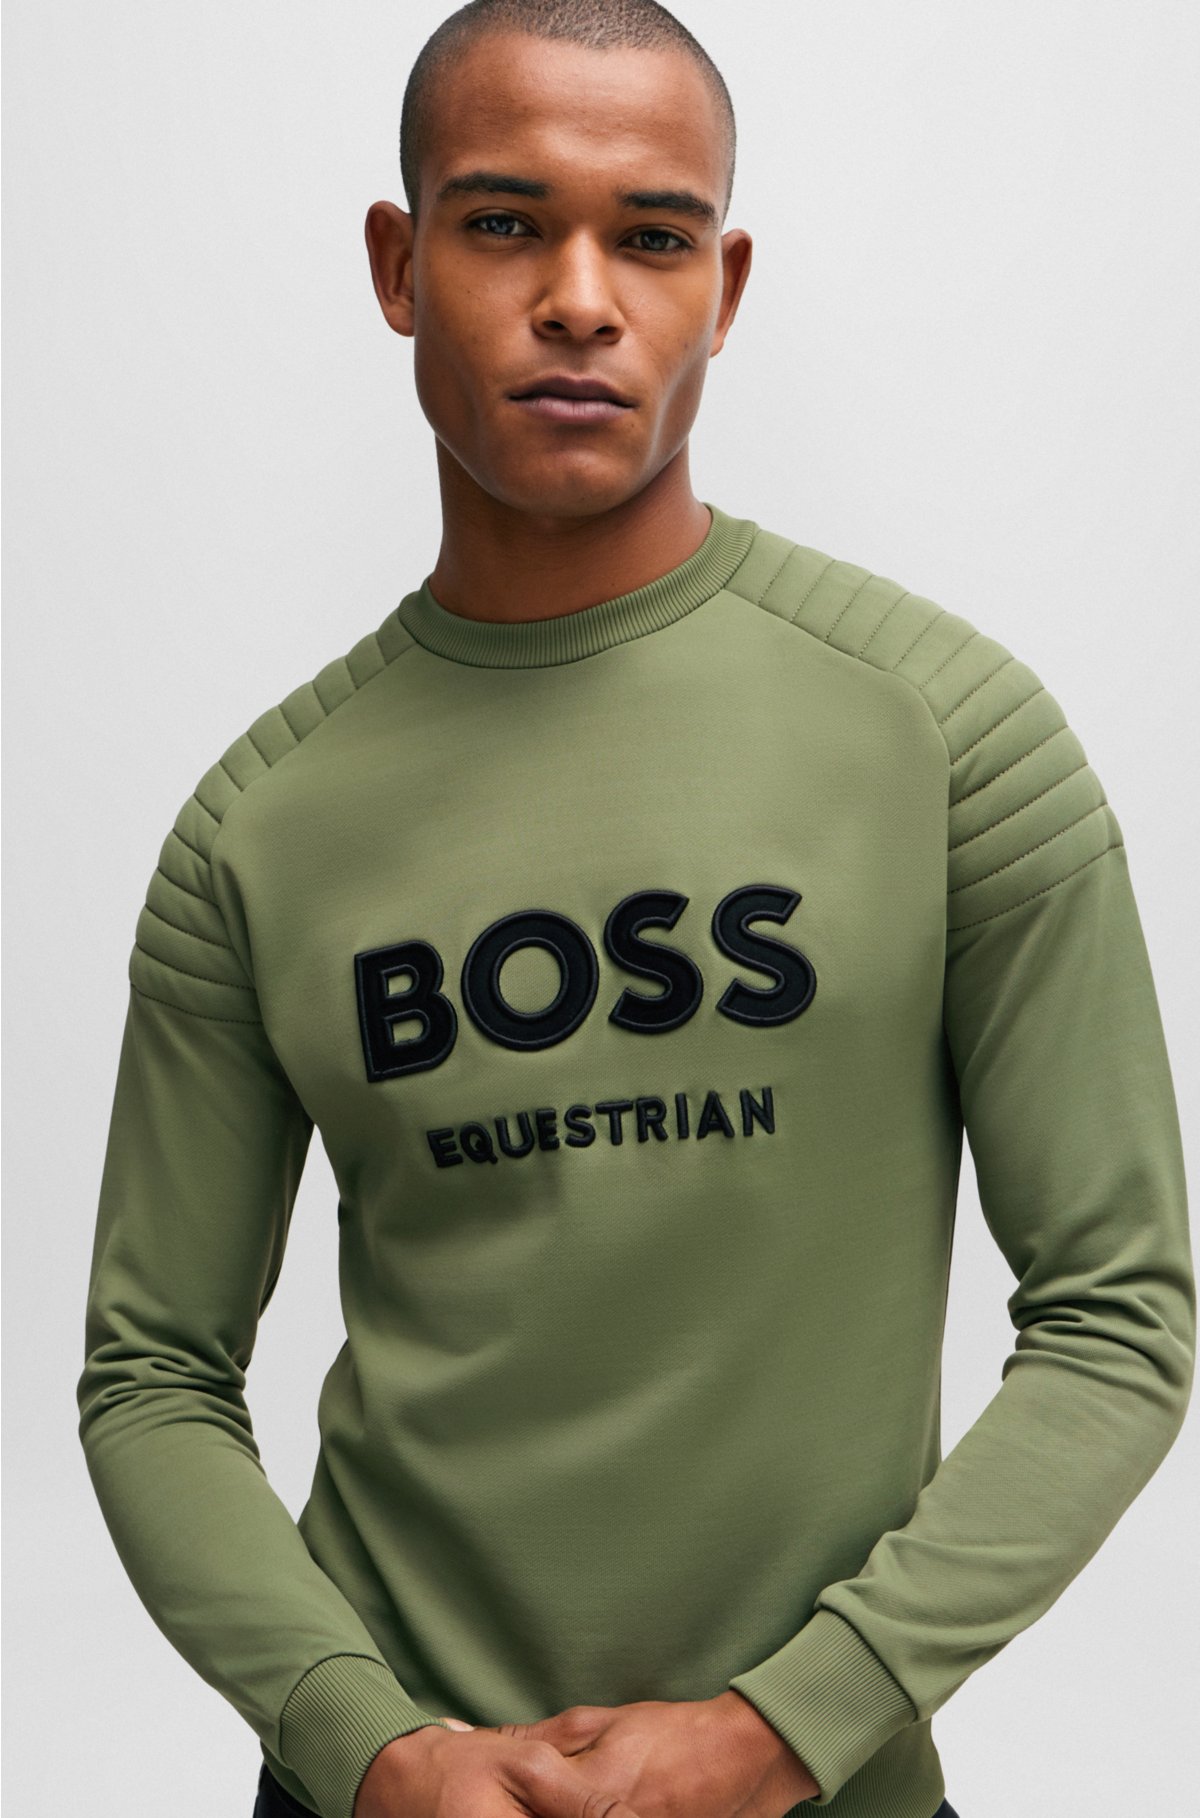 Equestrian sweatshirt in olive green with shoulder pads, Light Green